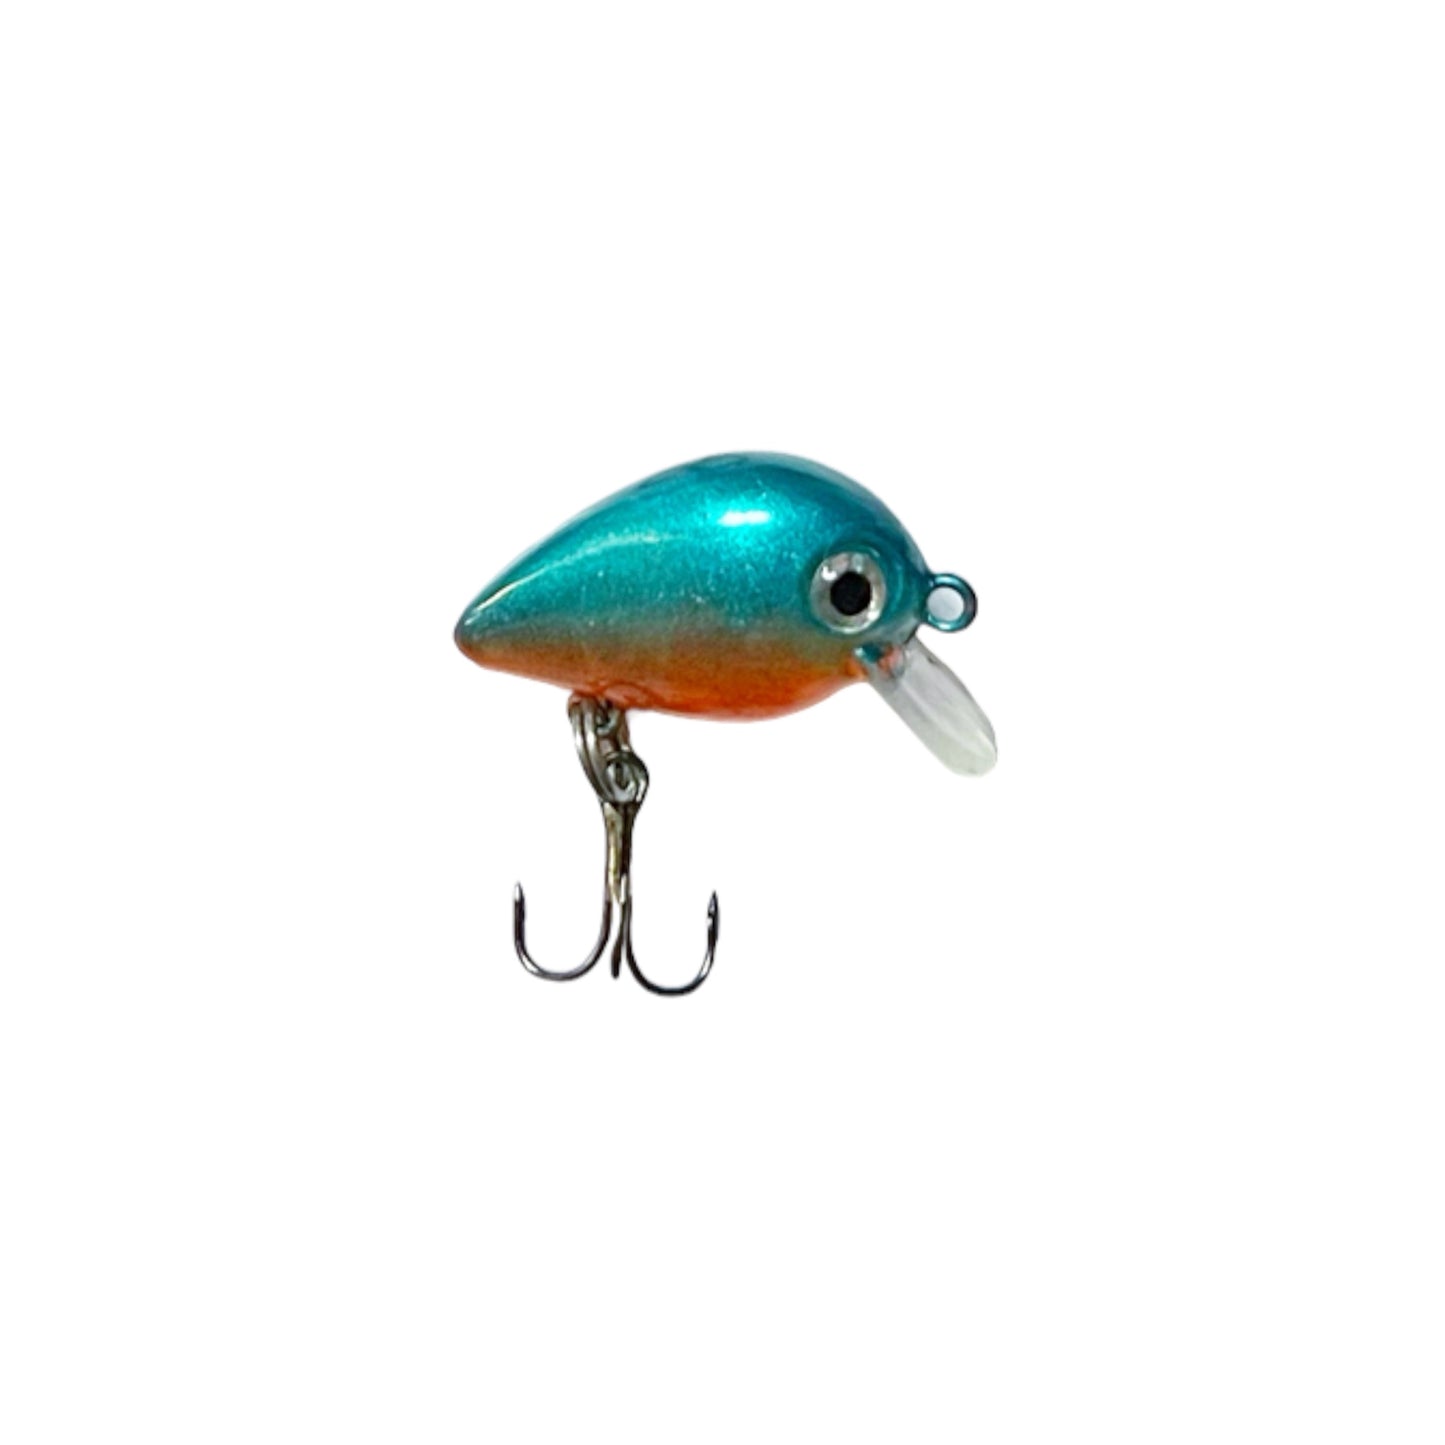 Micro panfish crankbait teal and orange with silver eyes and one hook. 